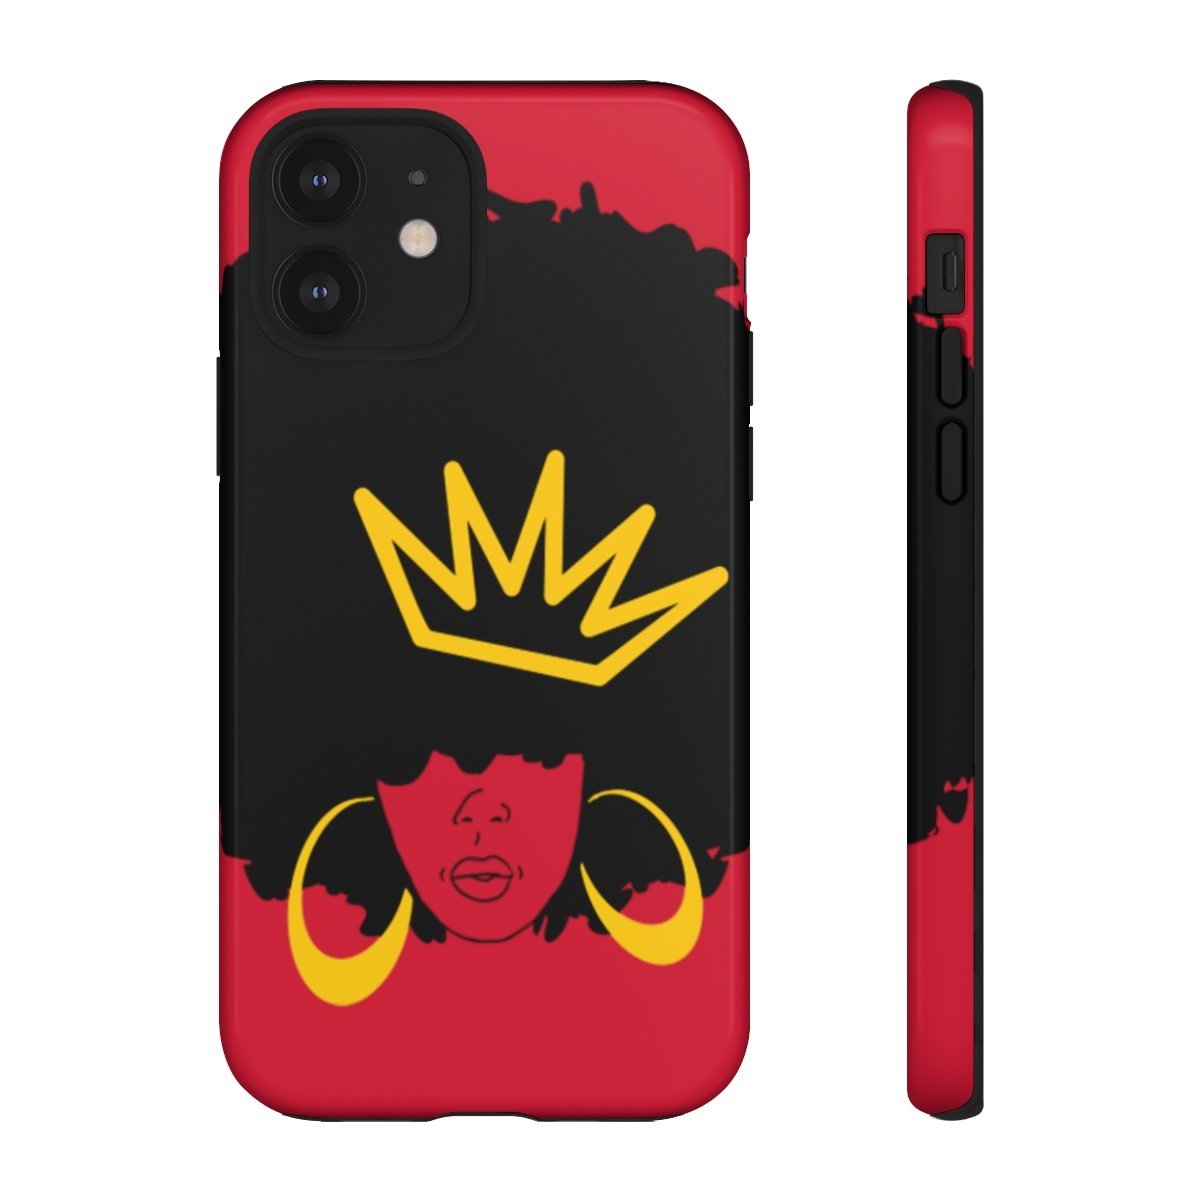 Afro Queen iPhone Case - The Trini Gee